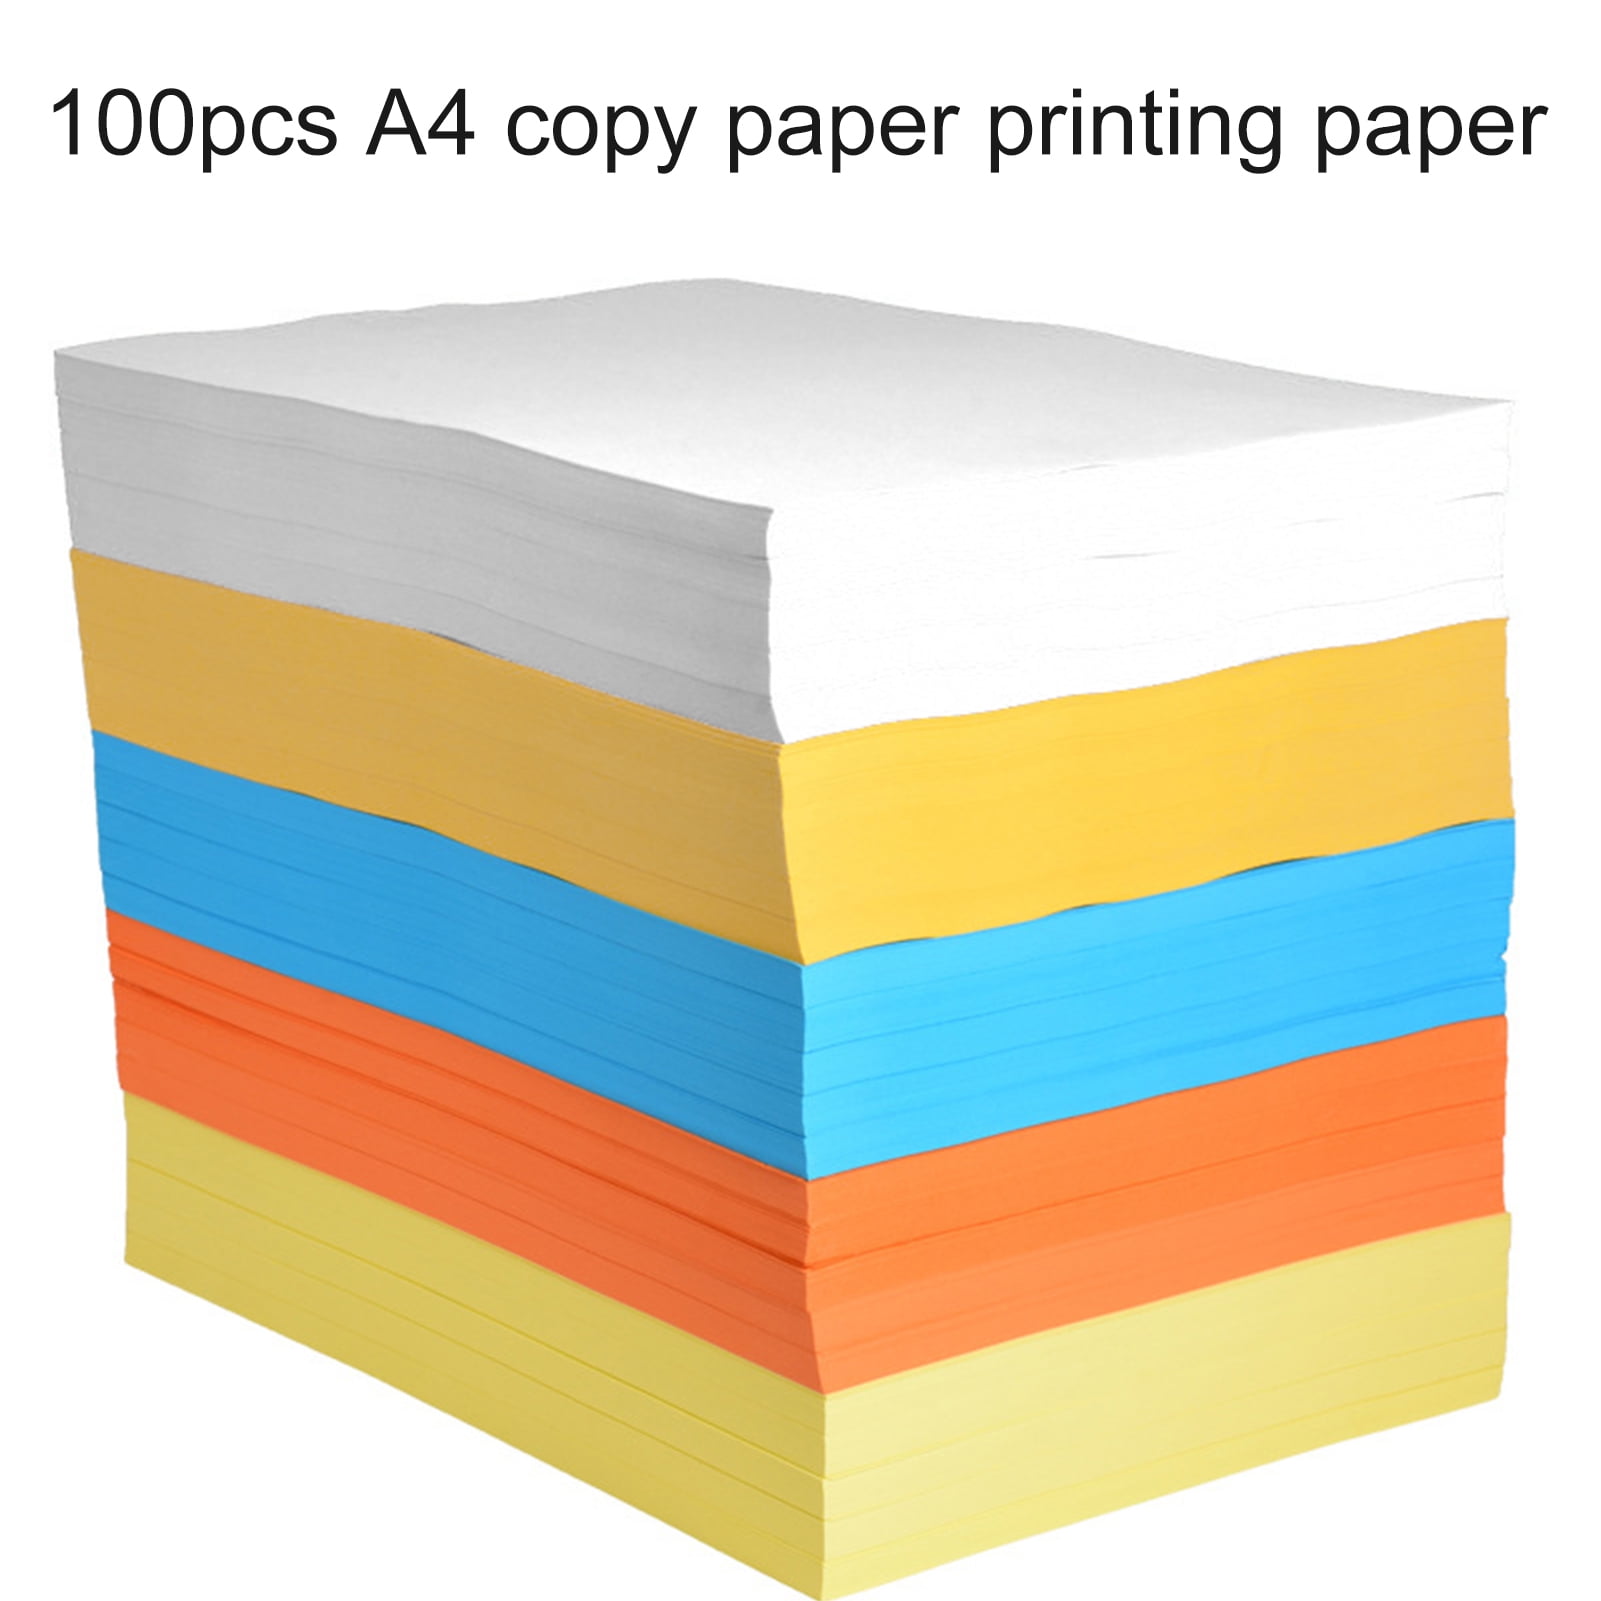 Nuburi - A5 Size Premium Printer Paper - Ideal for Professional Documents -  Smooth Bright White - 80 gsm / 21 lb. (200 Sheets)